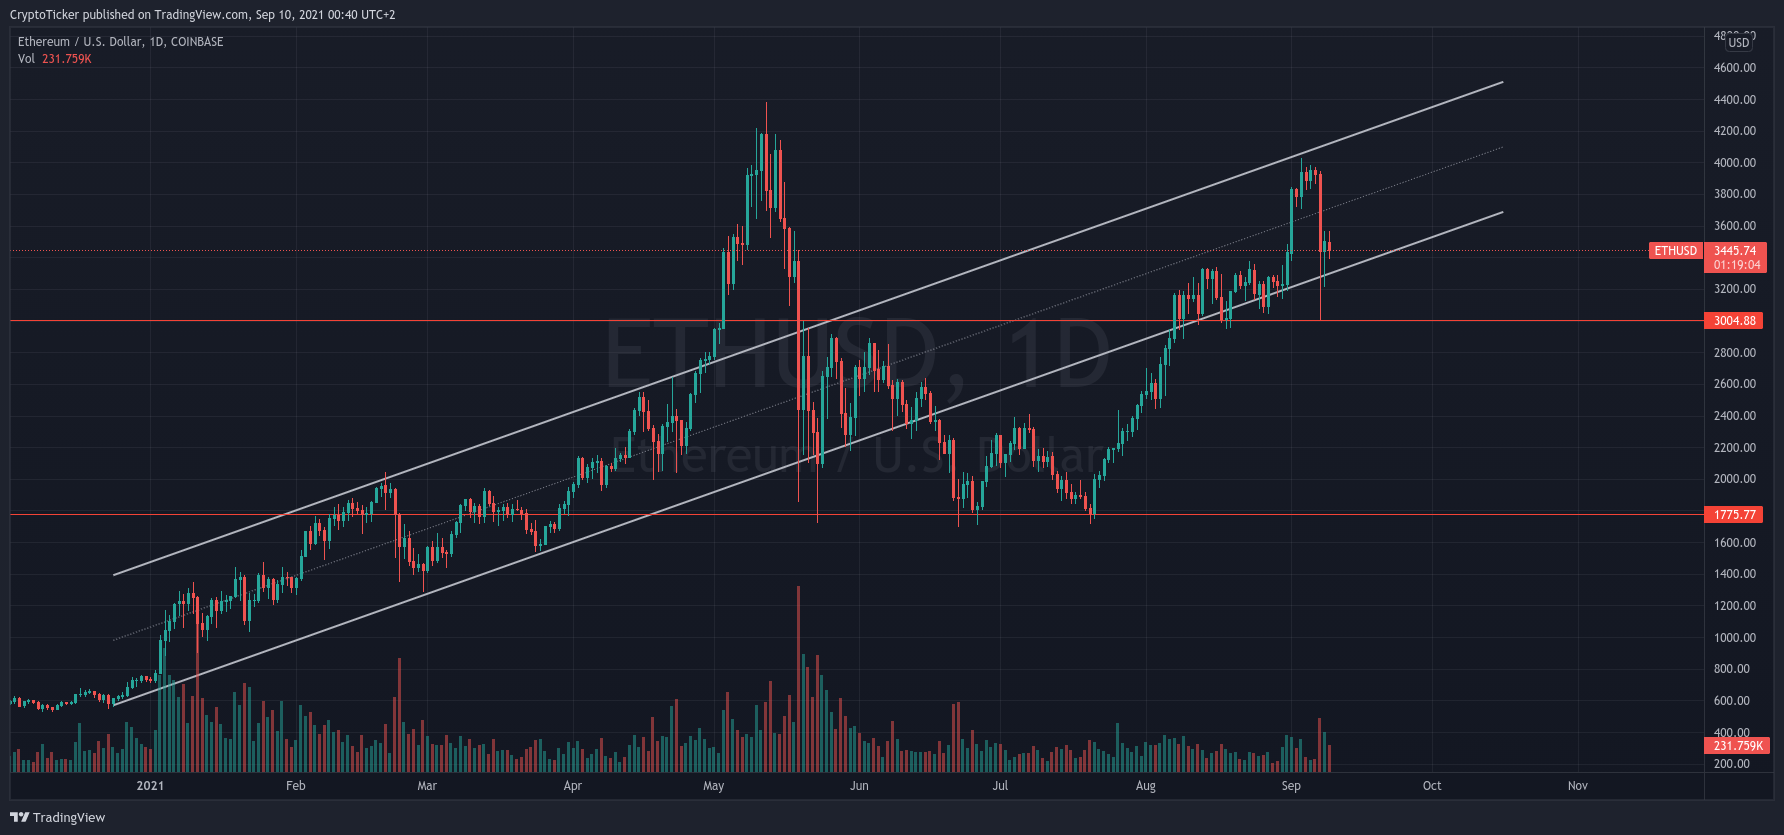 ETH/USD 1-day chart showing Ether's uptrend channel